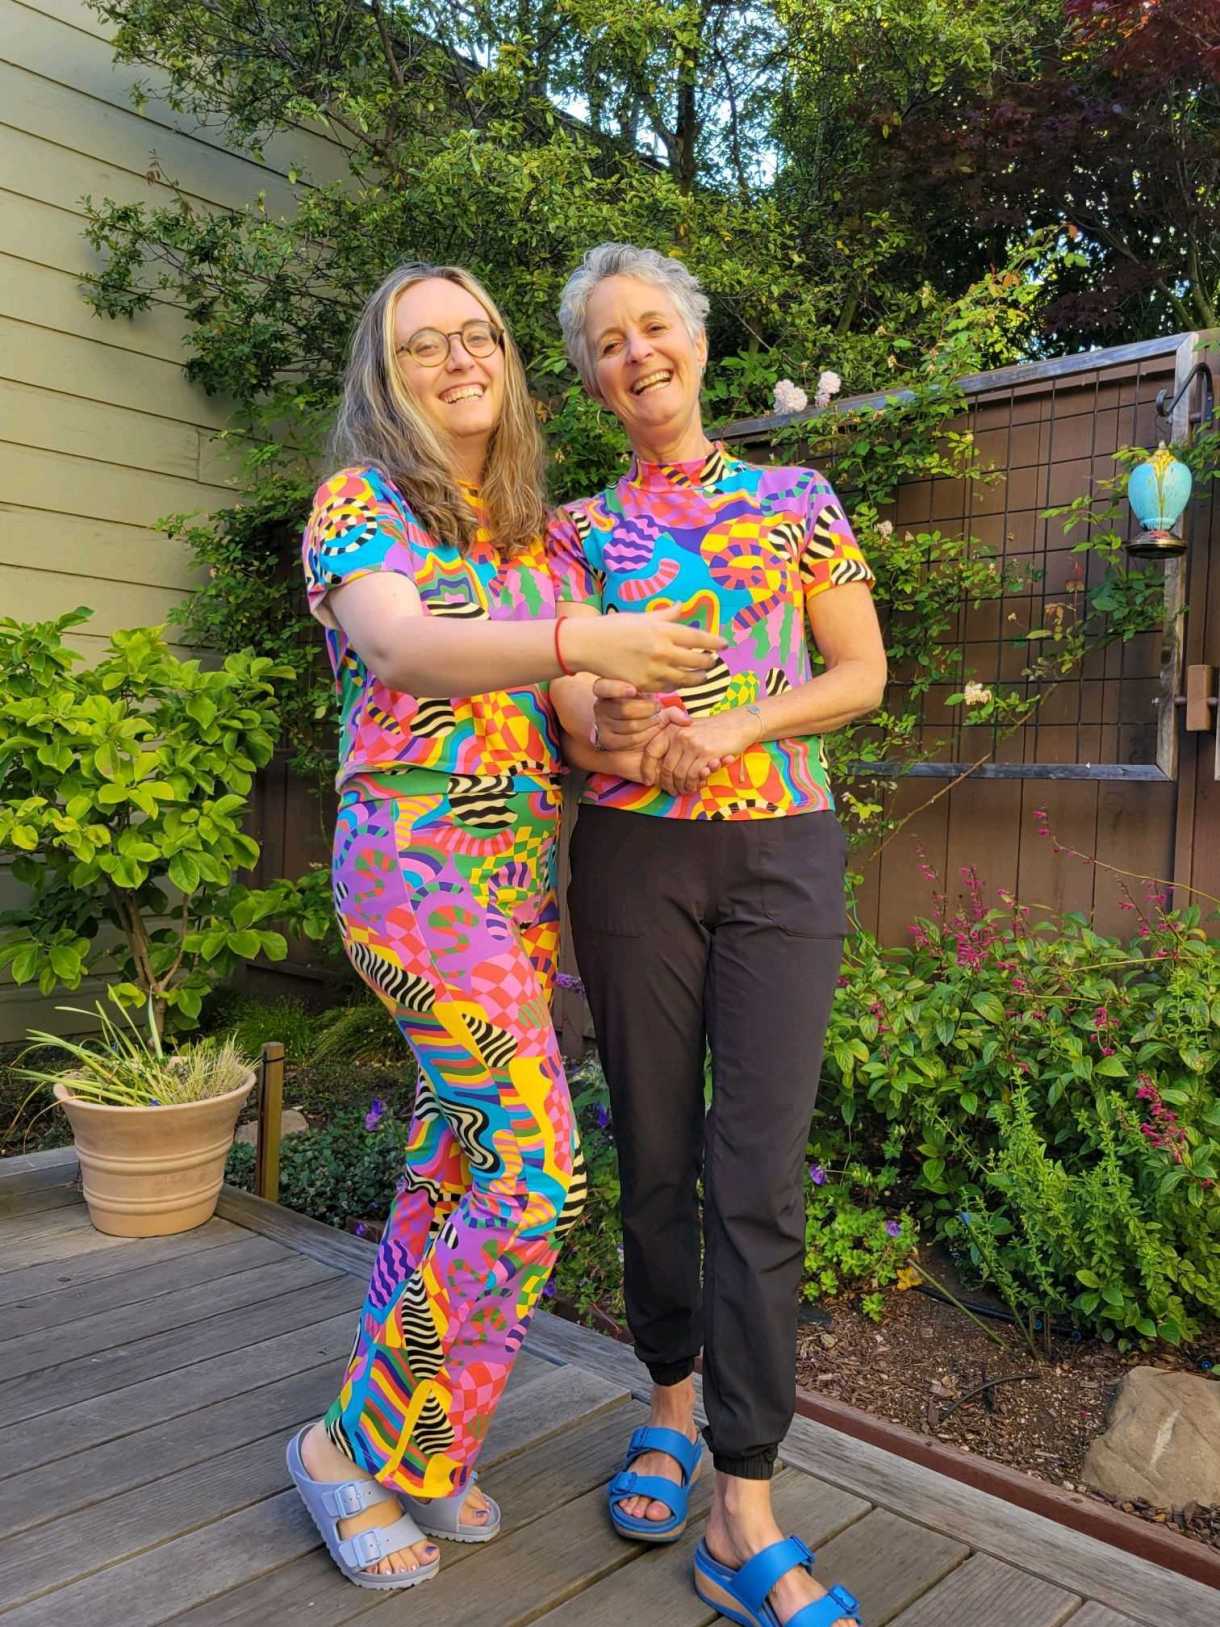 Anya and her mom wear matching outfits with an absolutely WILD PATTERN on them! They both smile and pose for the camera in this full length photo. Anya and her mom are both white women, Anya with long blonde and brown hair and her mom with white and gray short hair. Anya wears glasses.